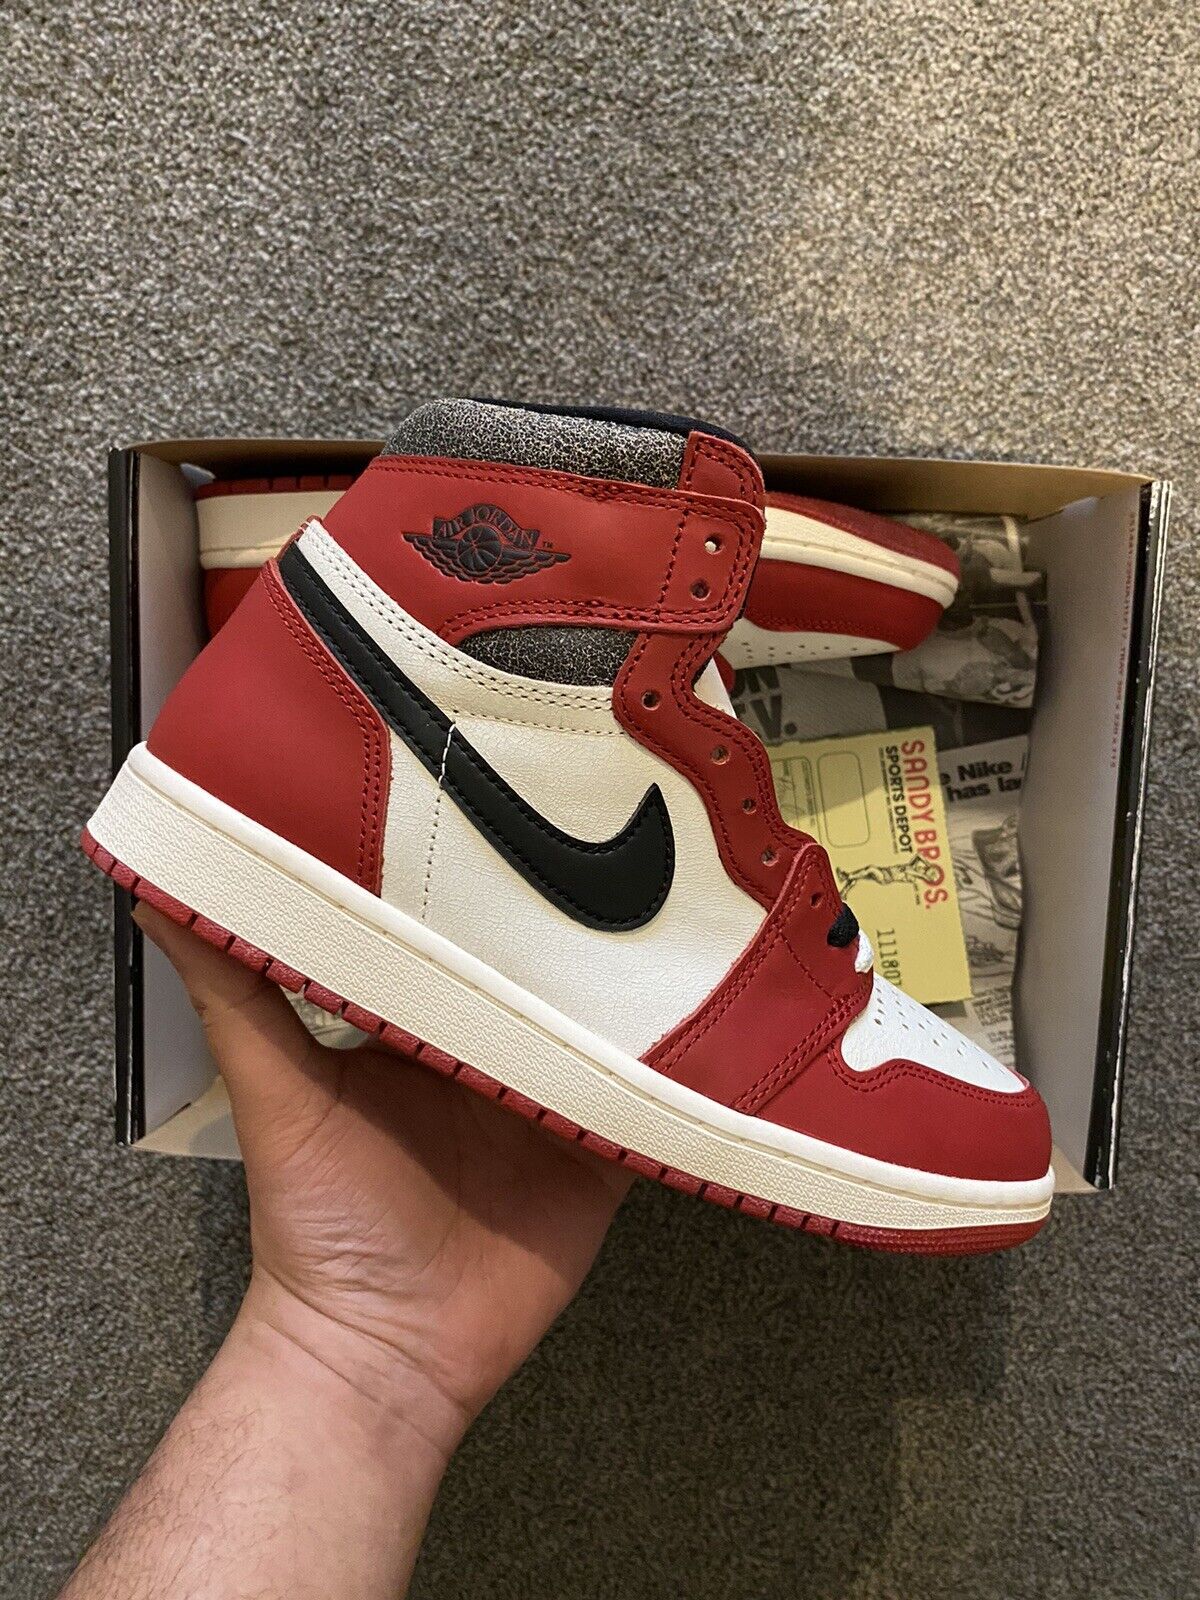 Nike Air Jordan 1 High OG Chicago Lost and Found - UK6 - Free 